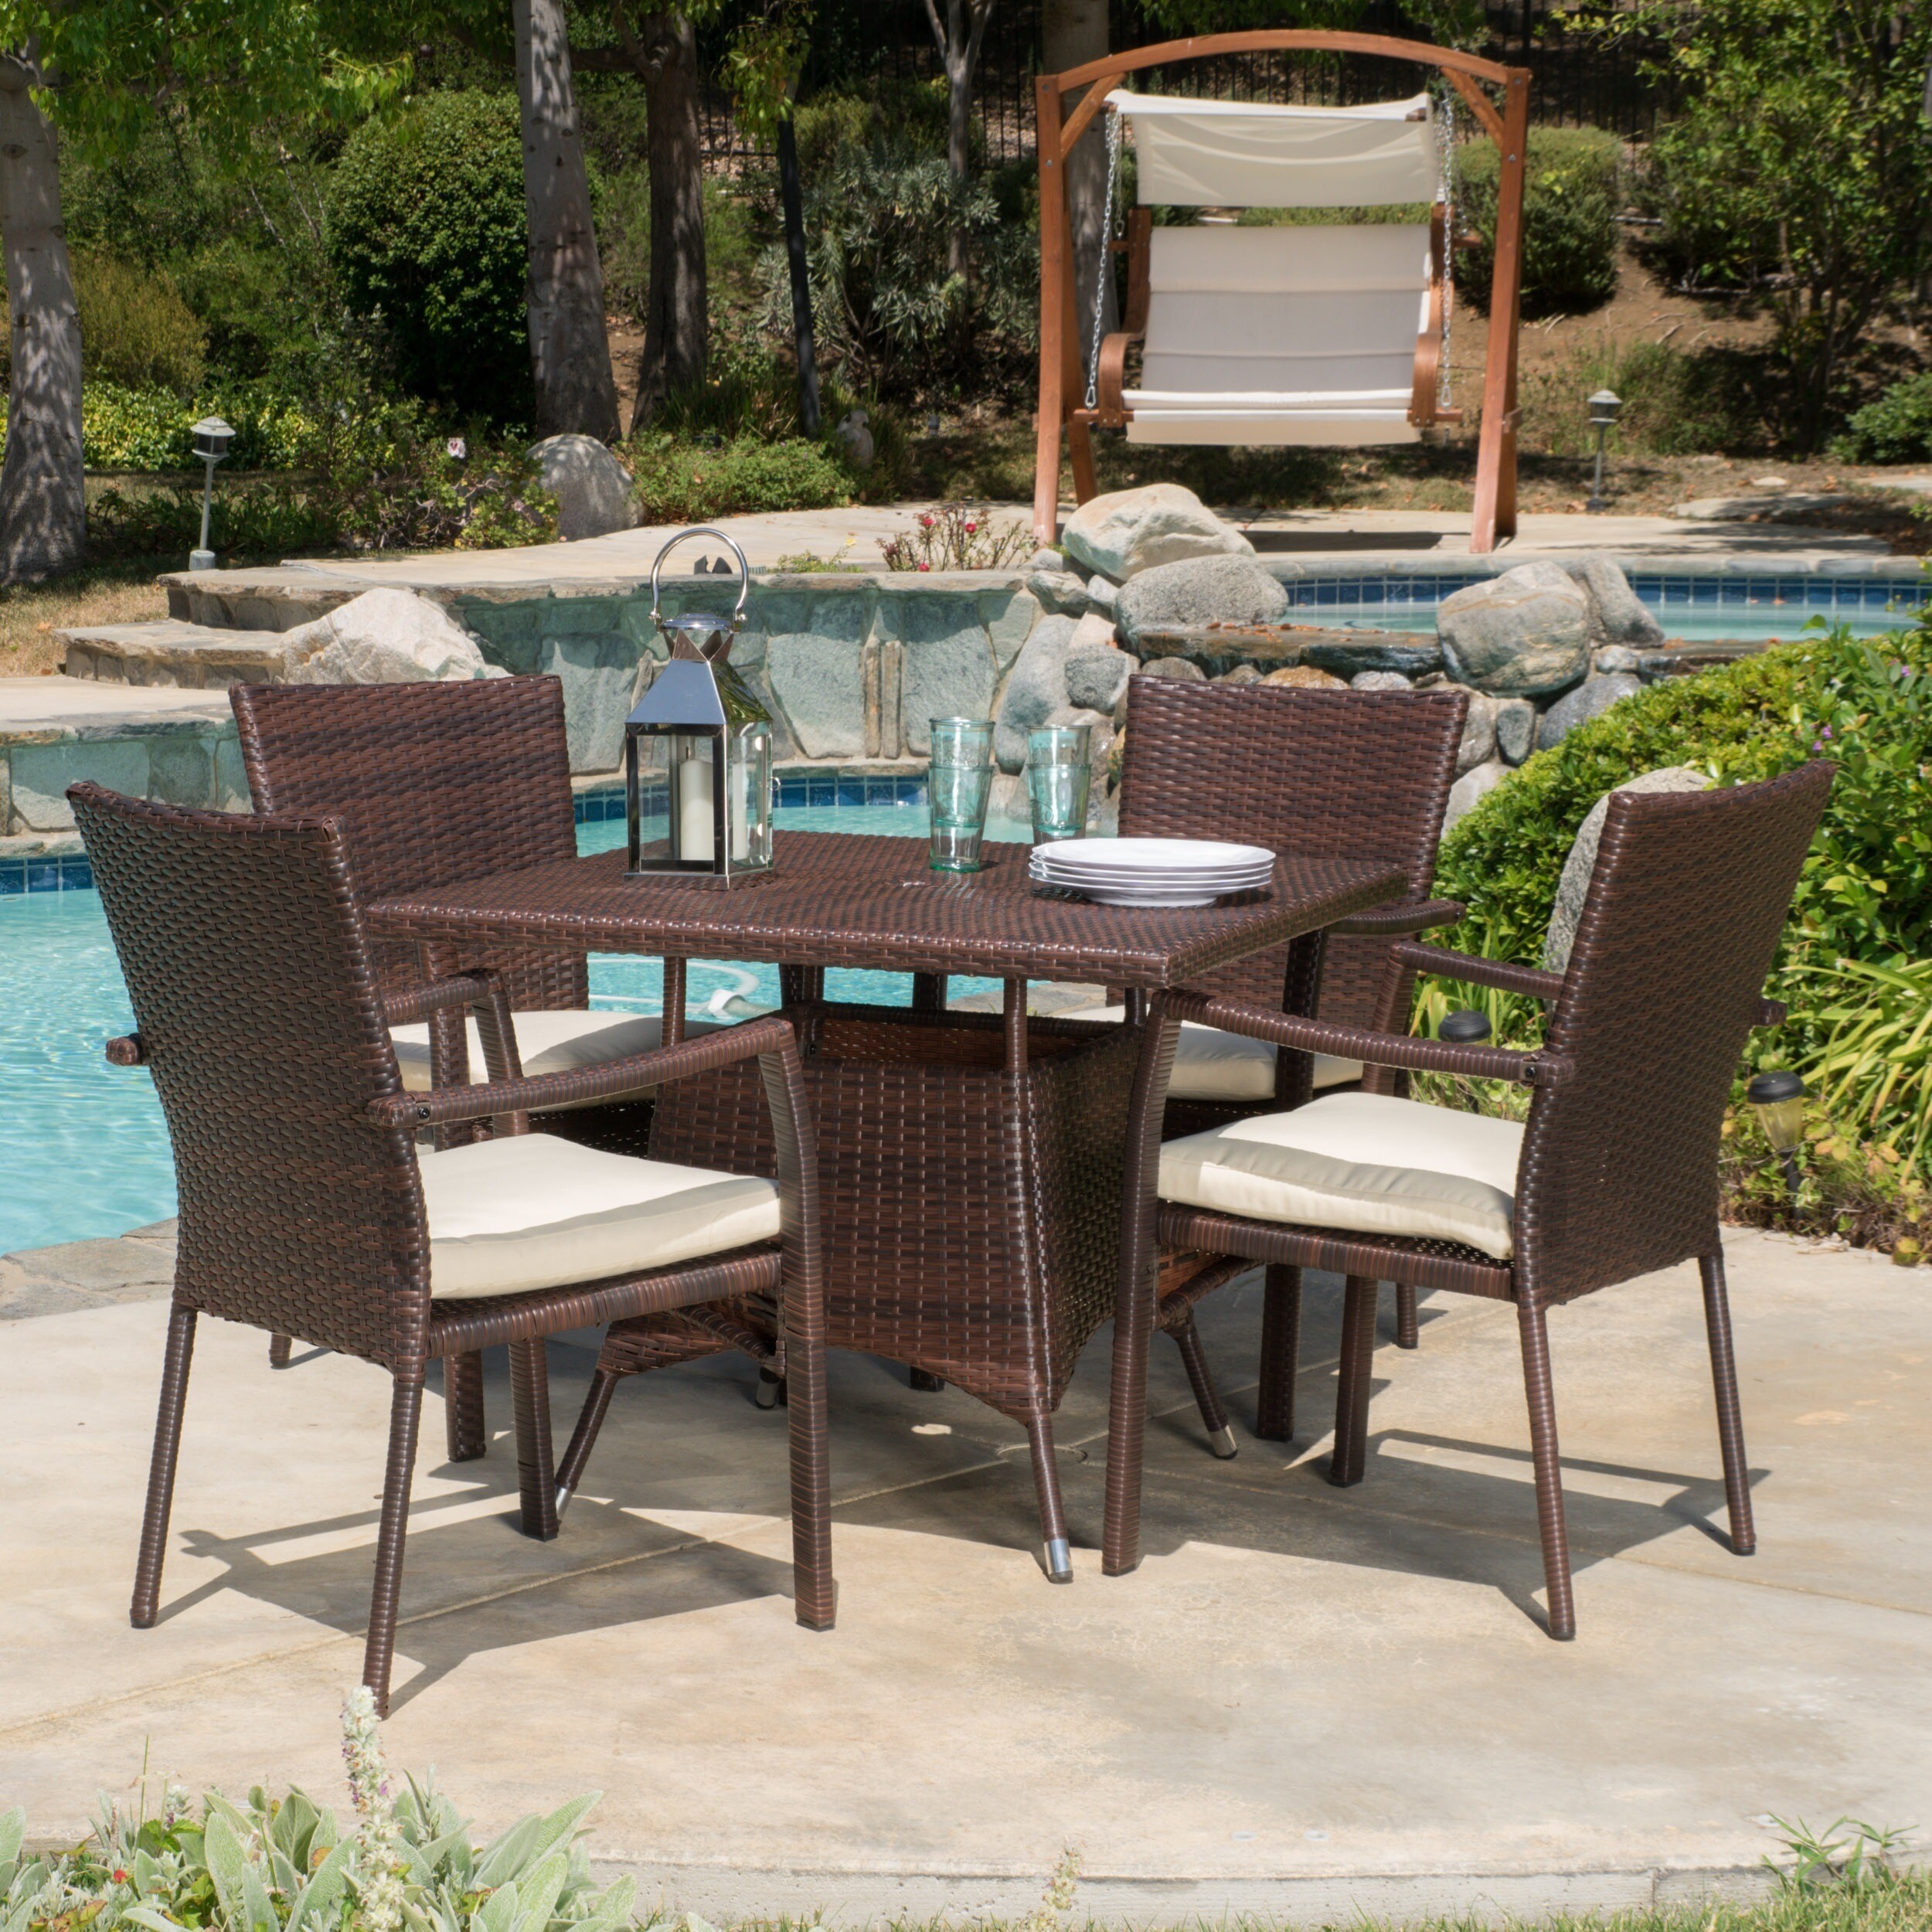 CAMPBELL OUTDOOR 5-PIECE Square Wicker Dining Set with $620.99 - PicClick